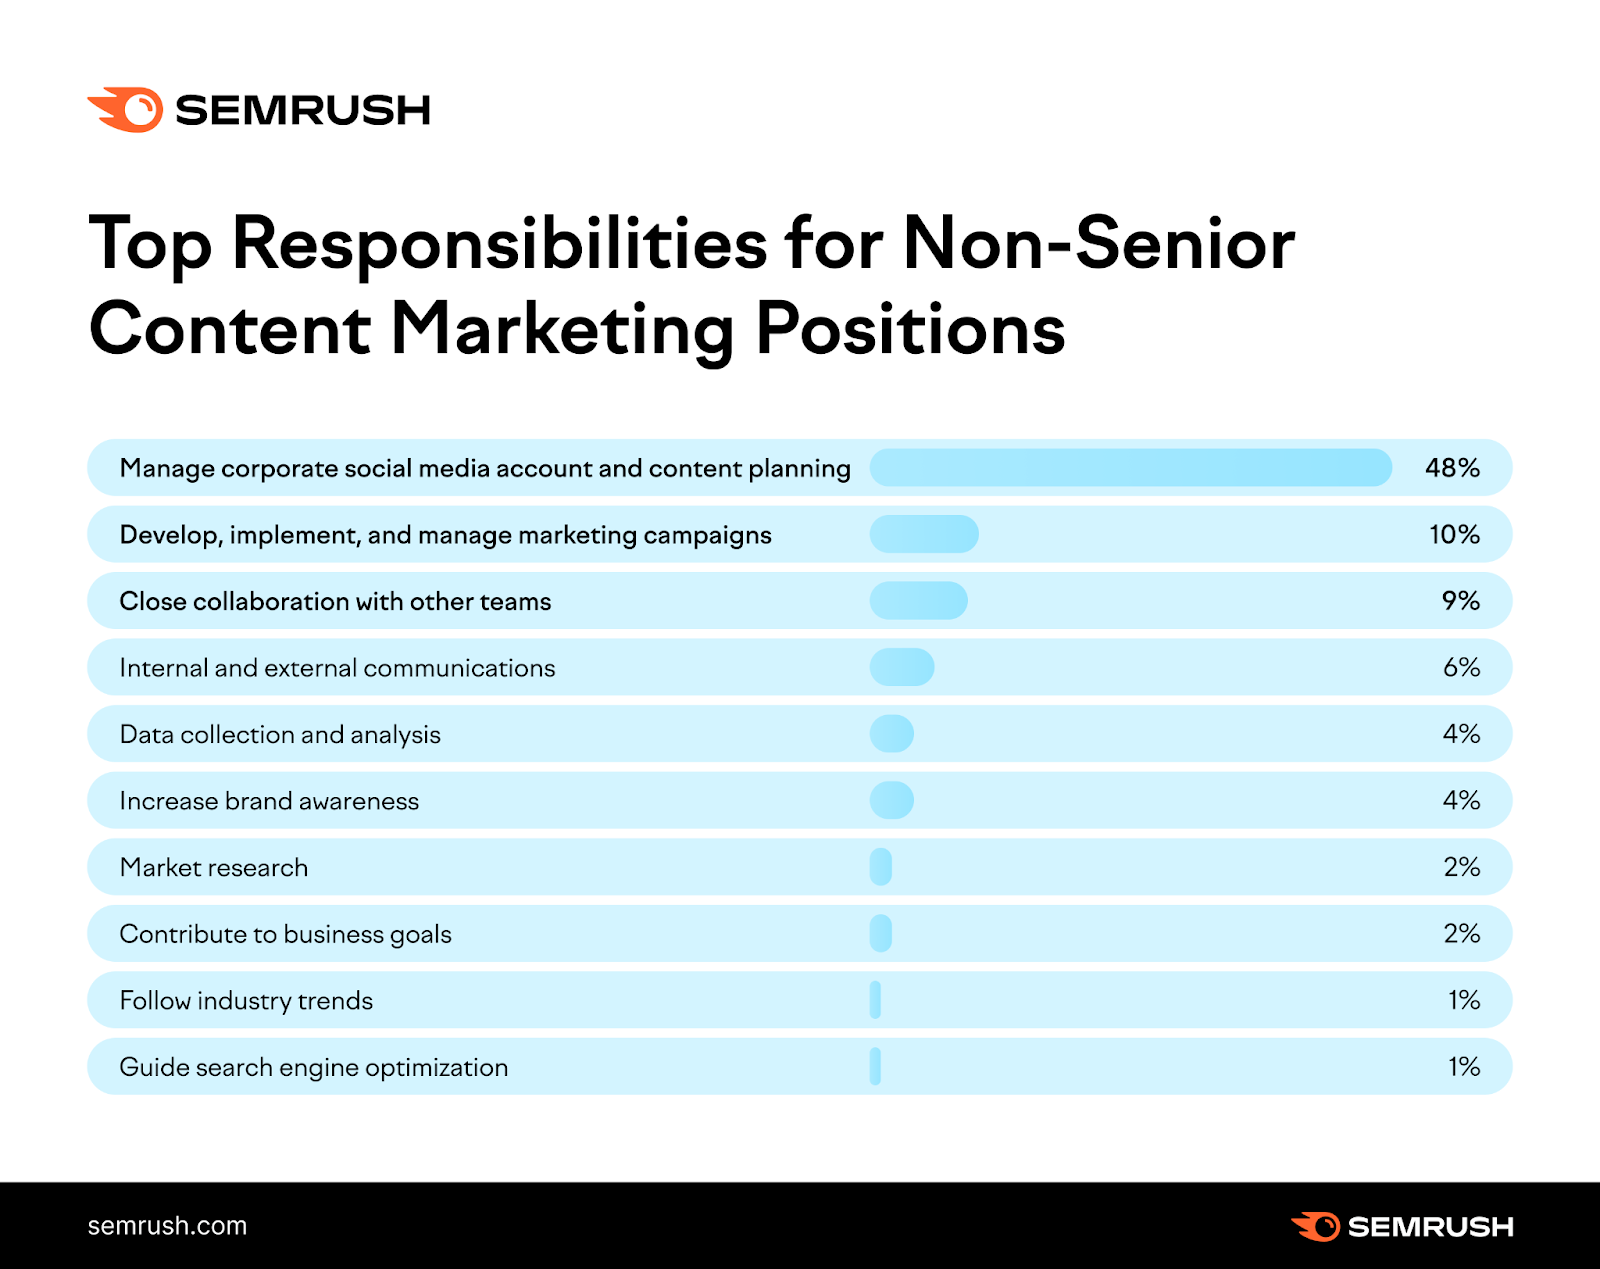 Top responsibilities for non-senior content marketing positions